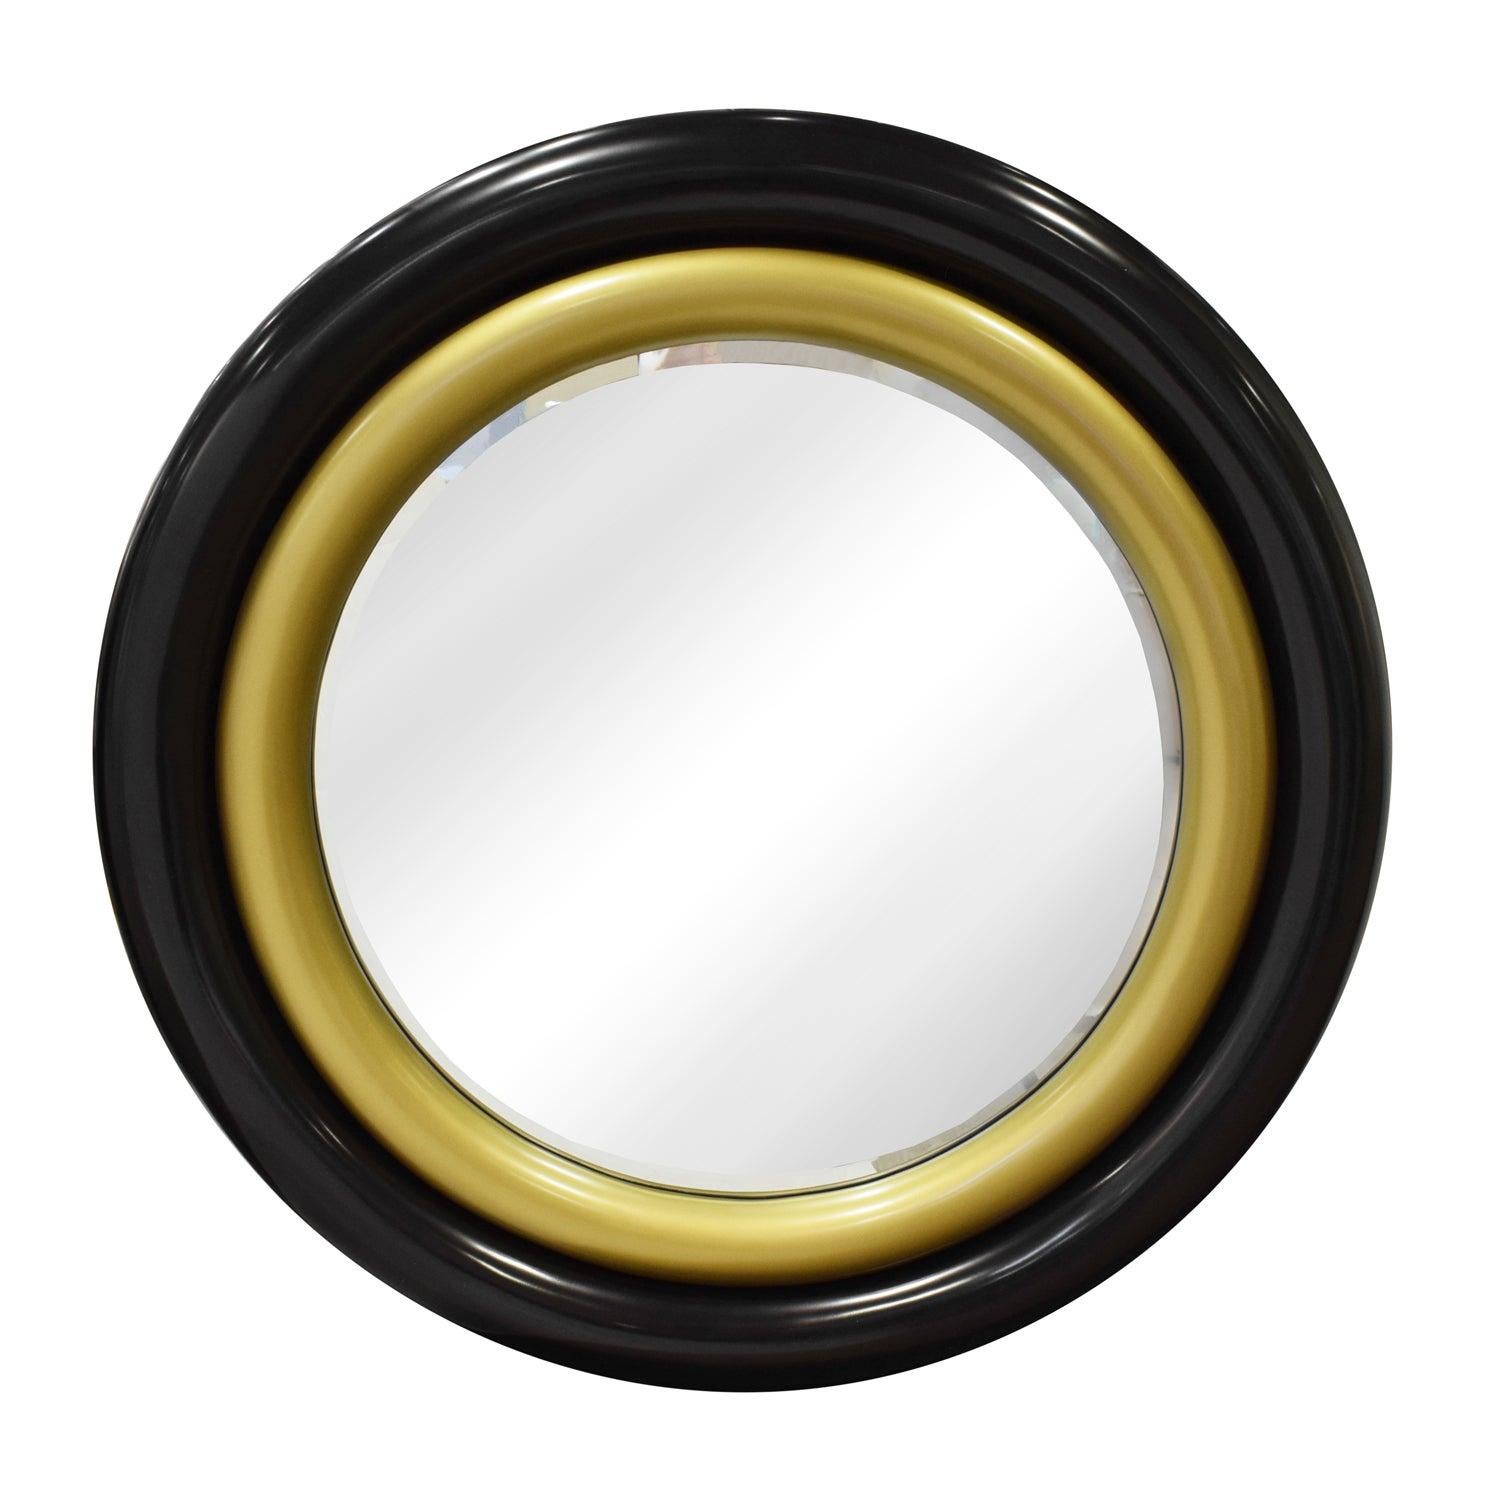 Karl Springer Wall Hanging "Bullseye Mirror" in Black and Gold Lacquer, 1980s